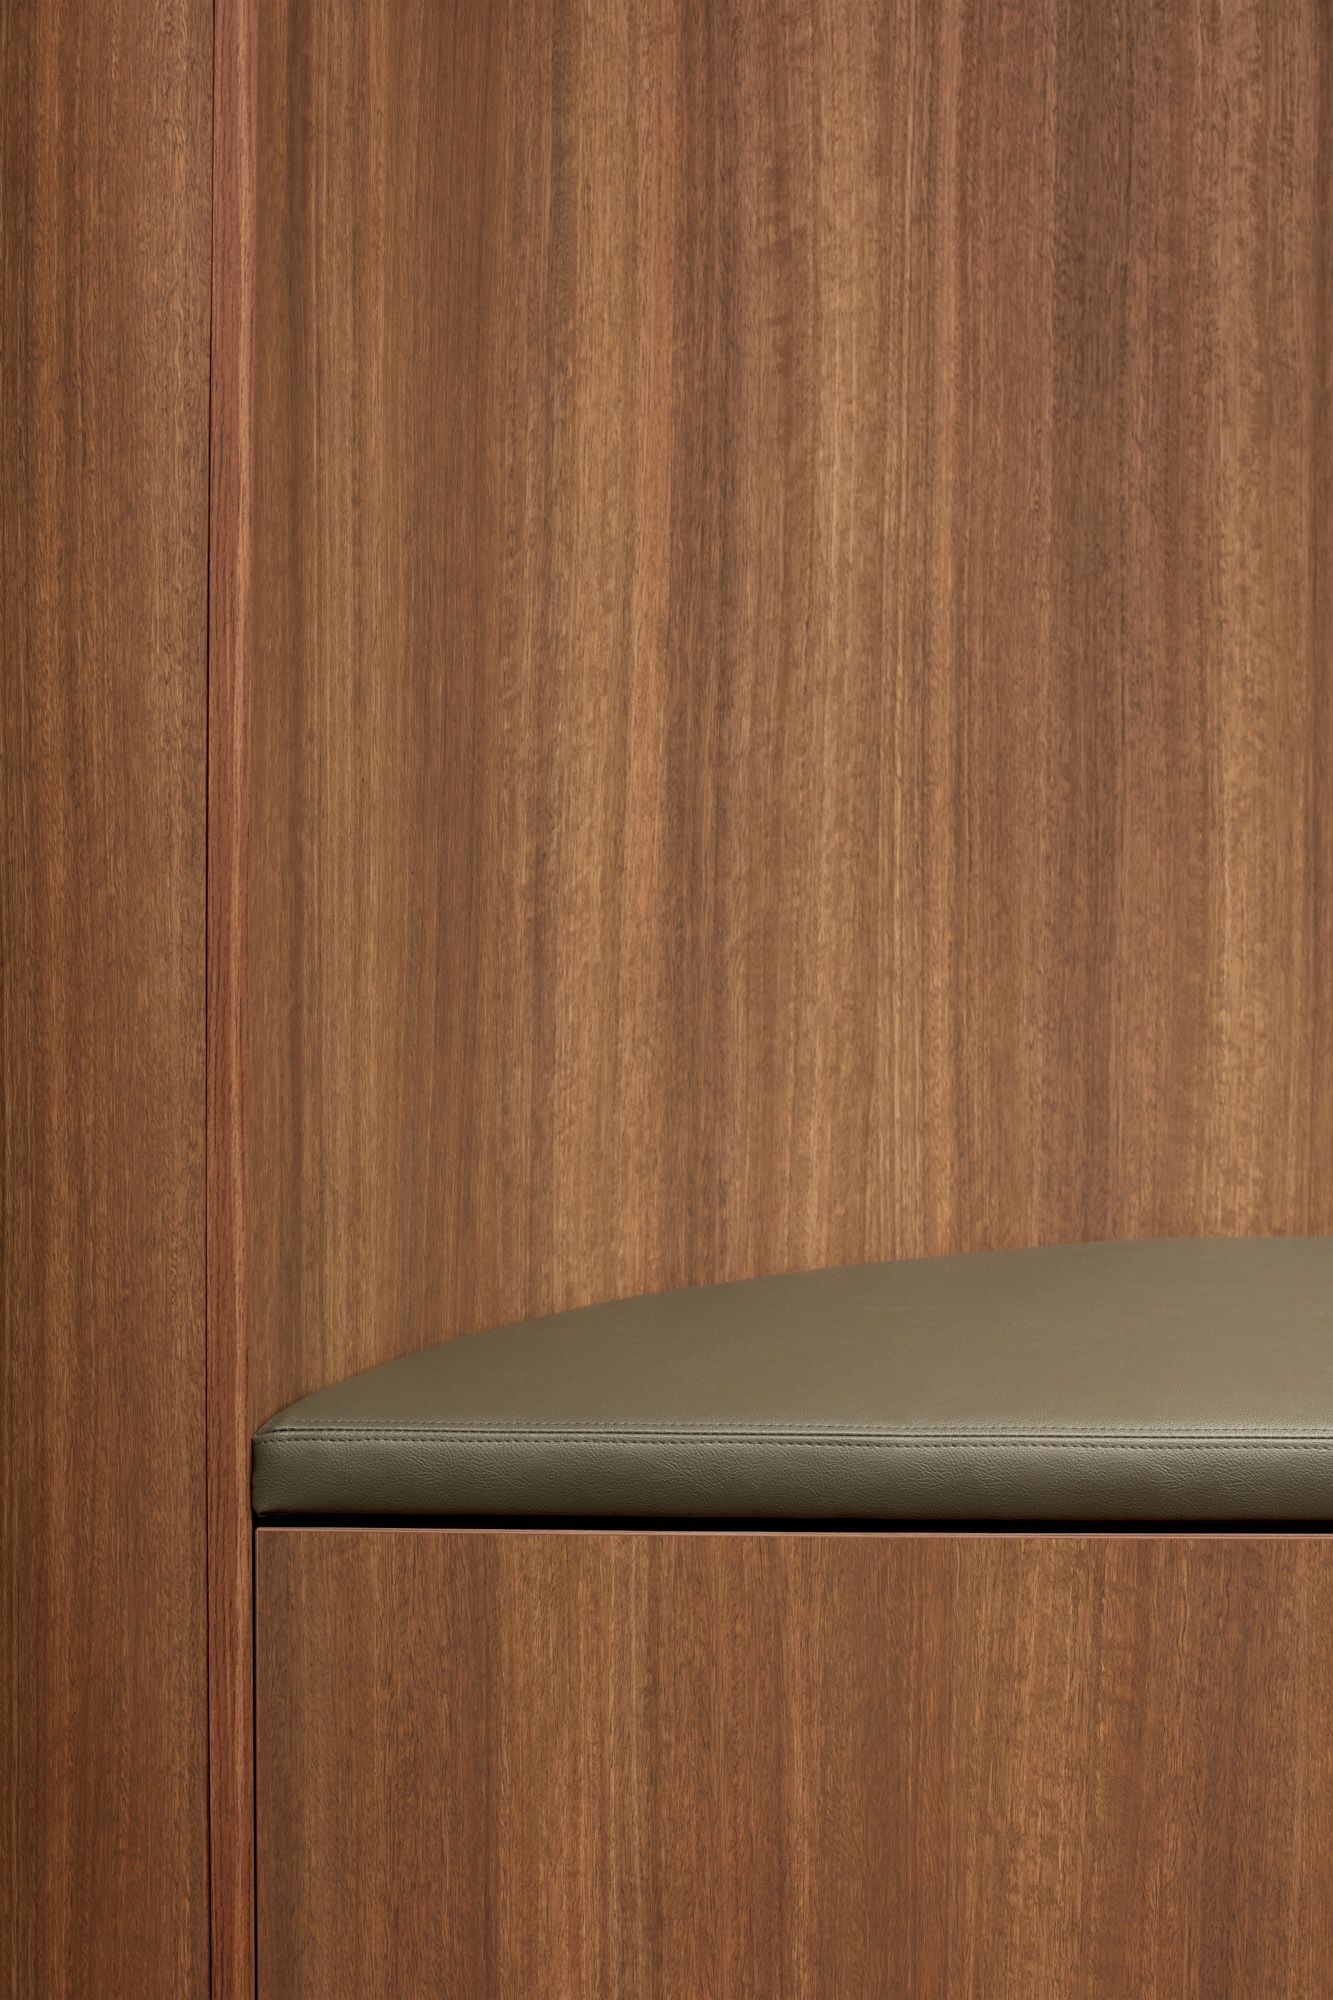 image of Flinders St workplace - banquette seat detail